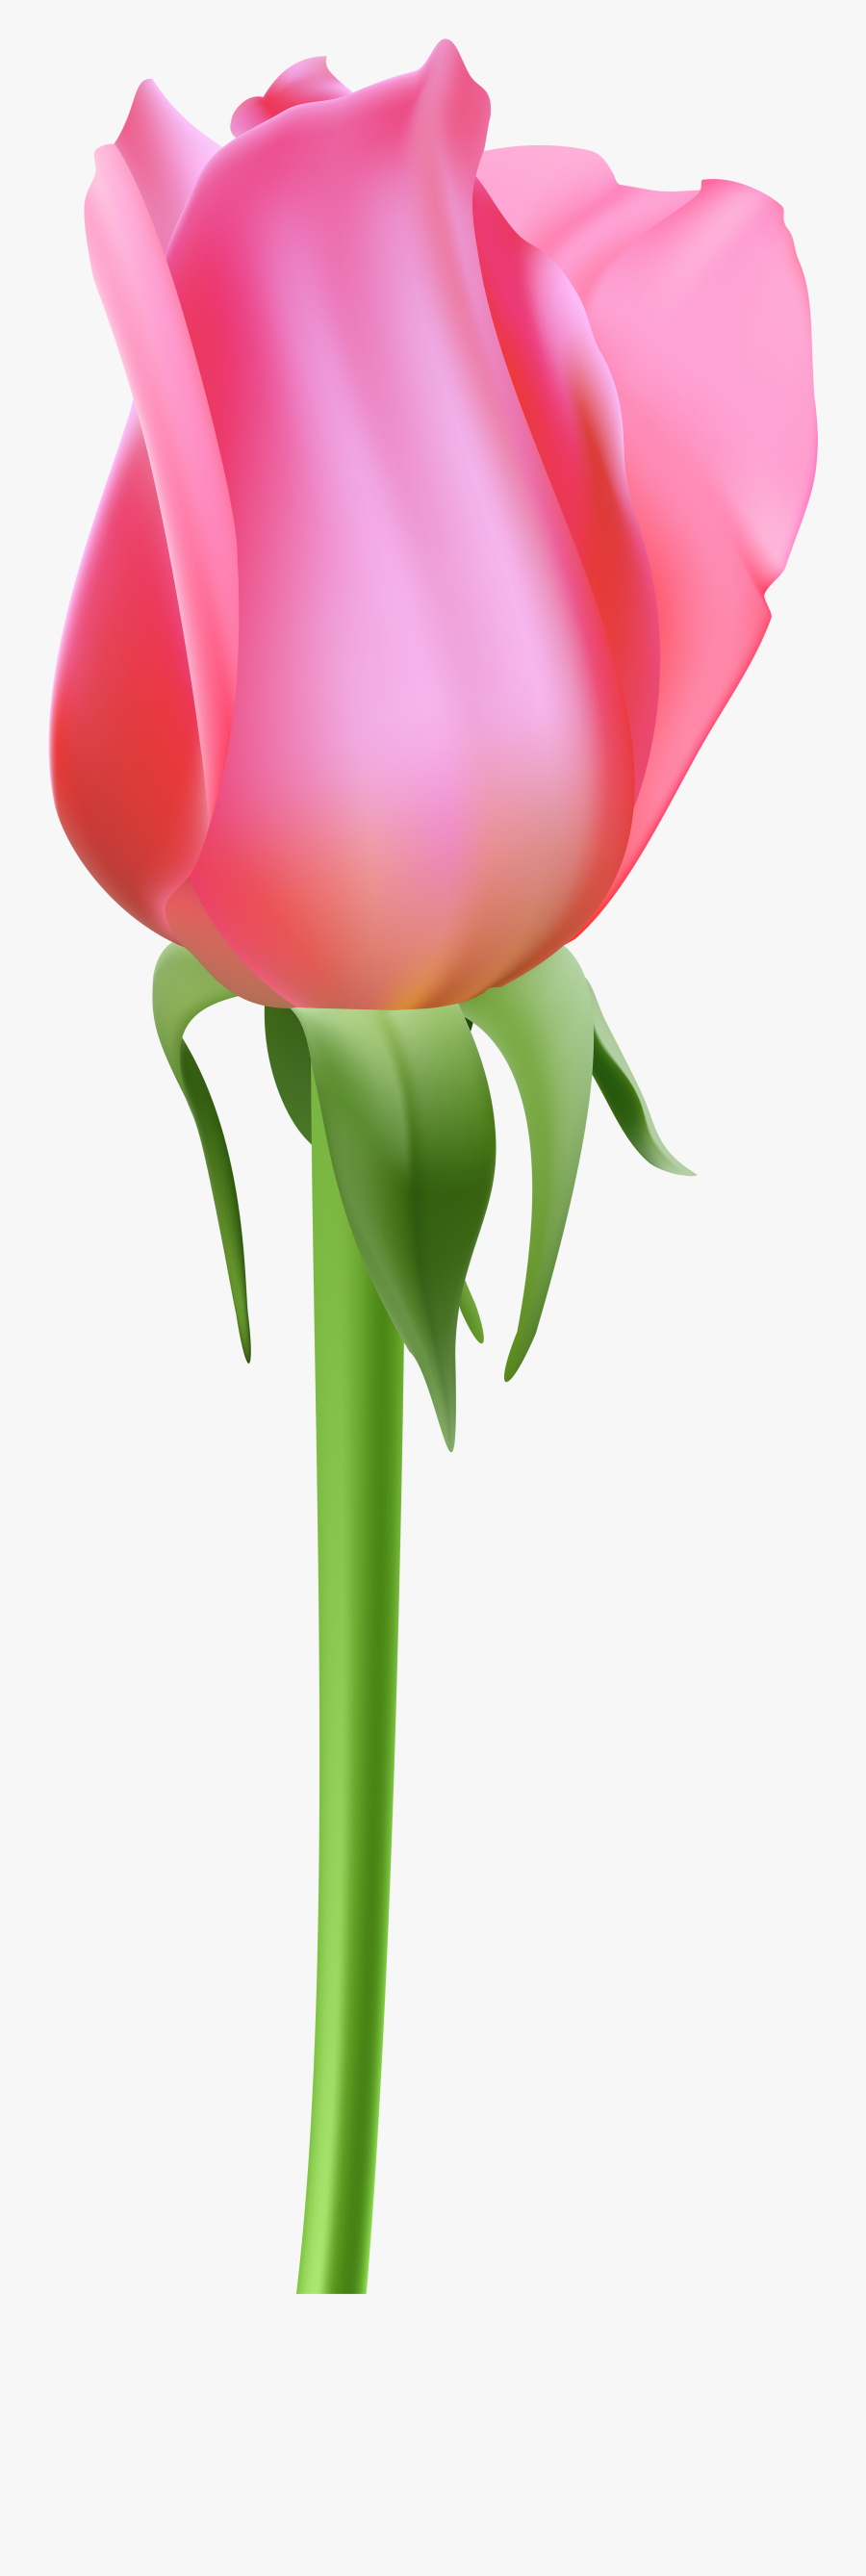 Pink Rose Bud Clipart, Transparent Clipart